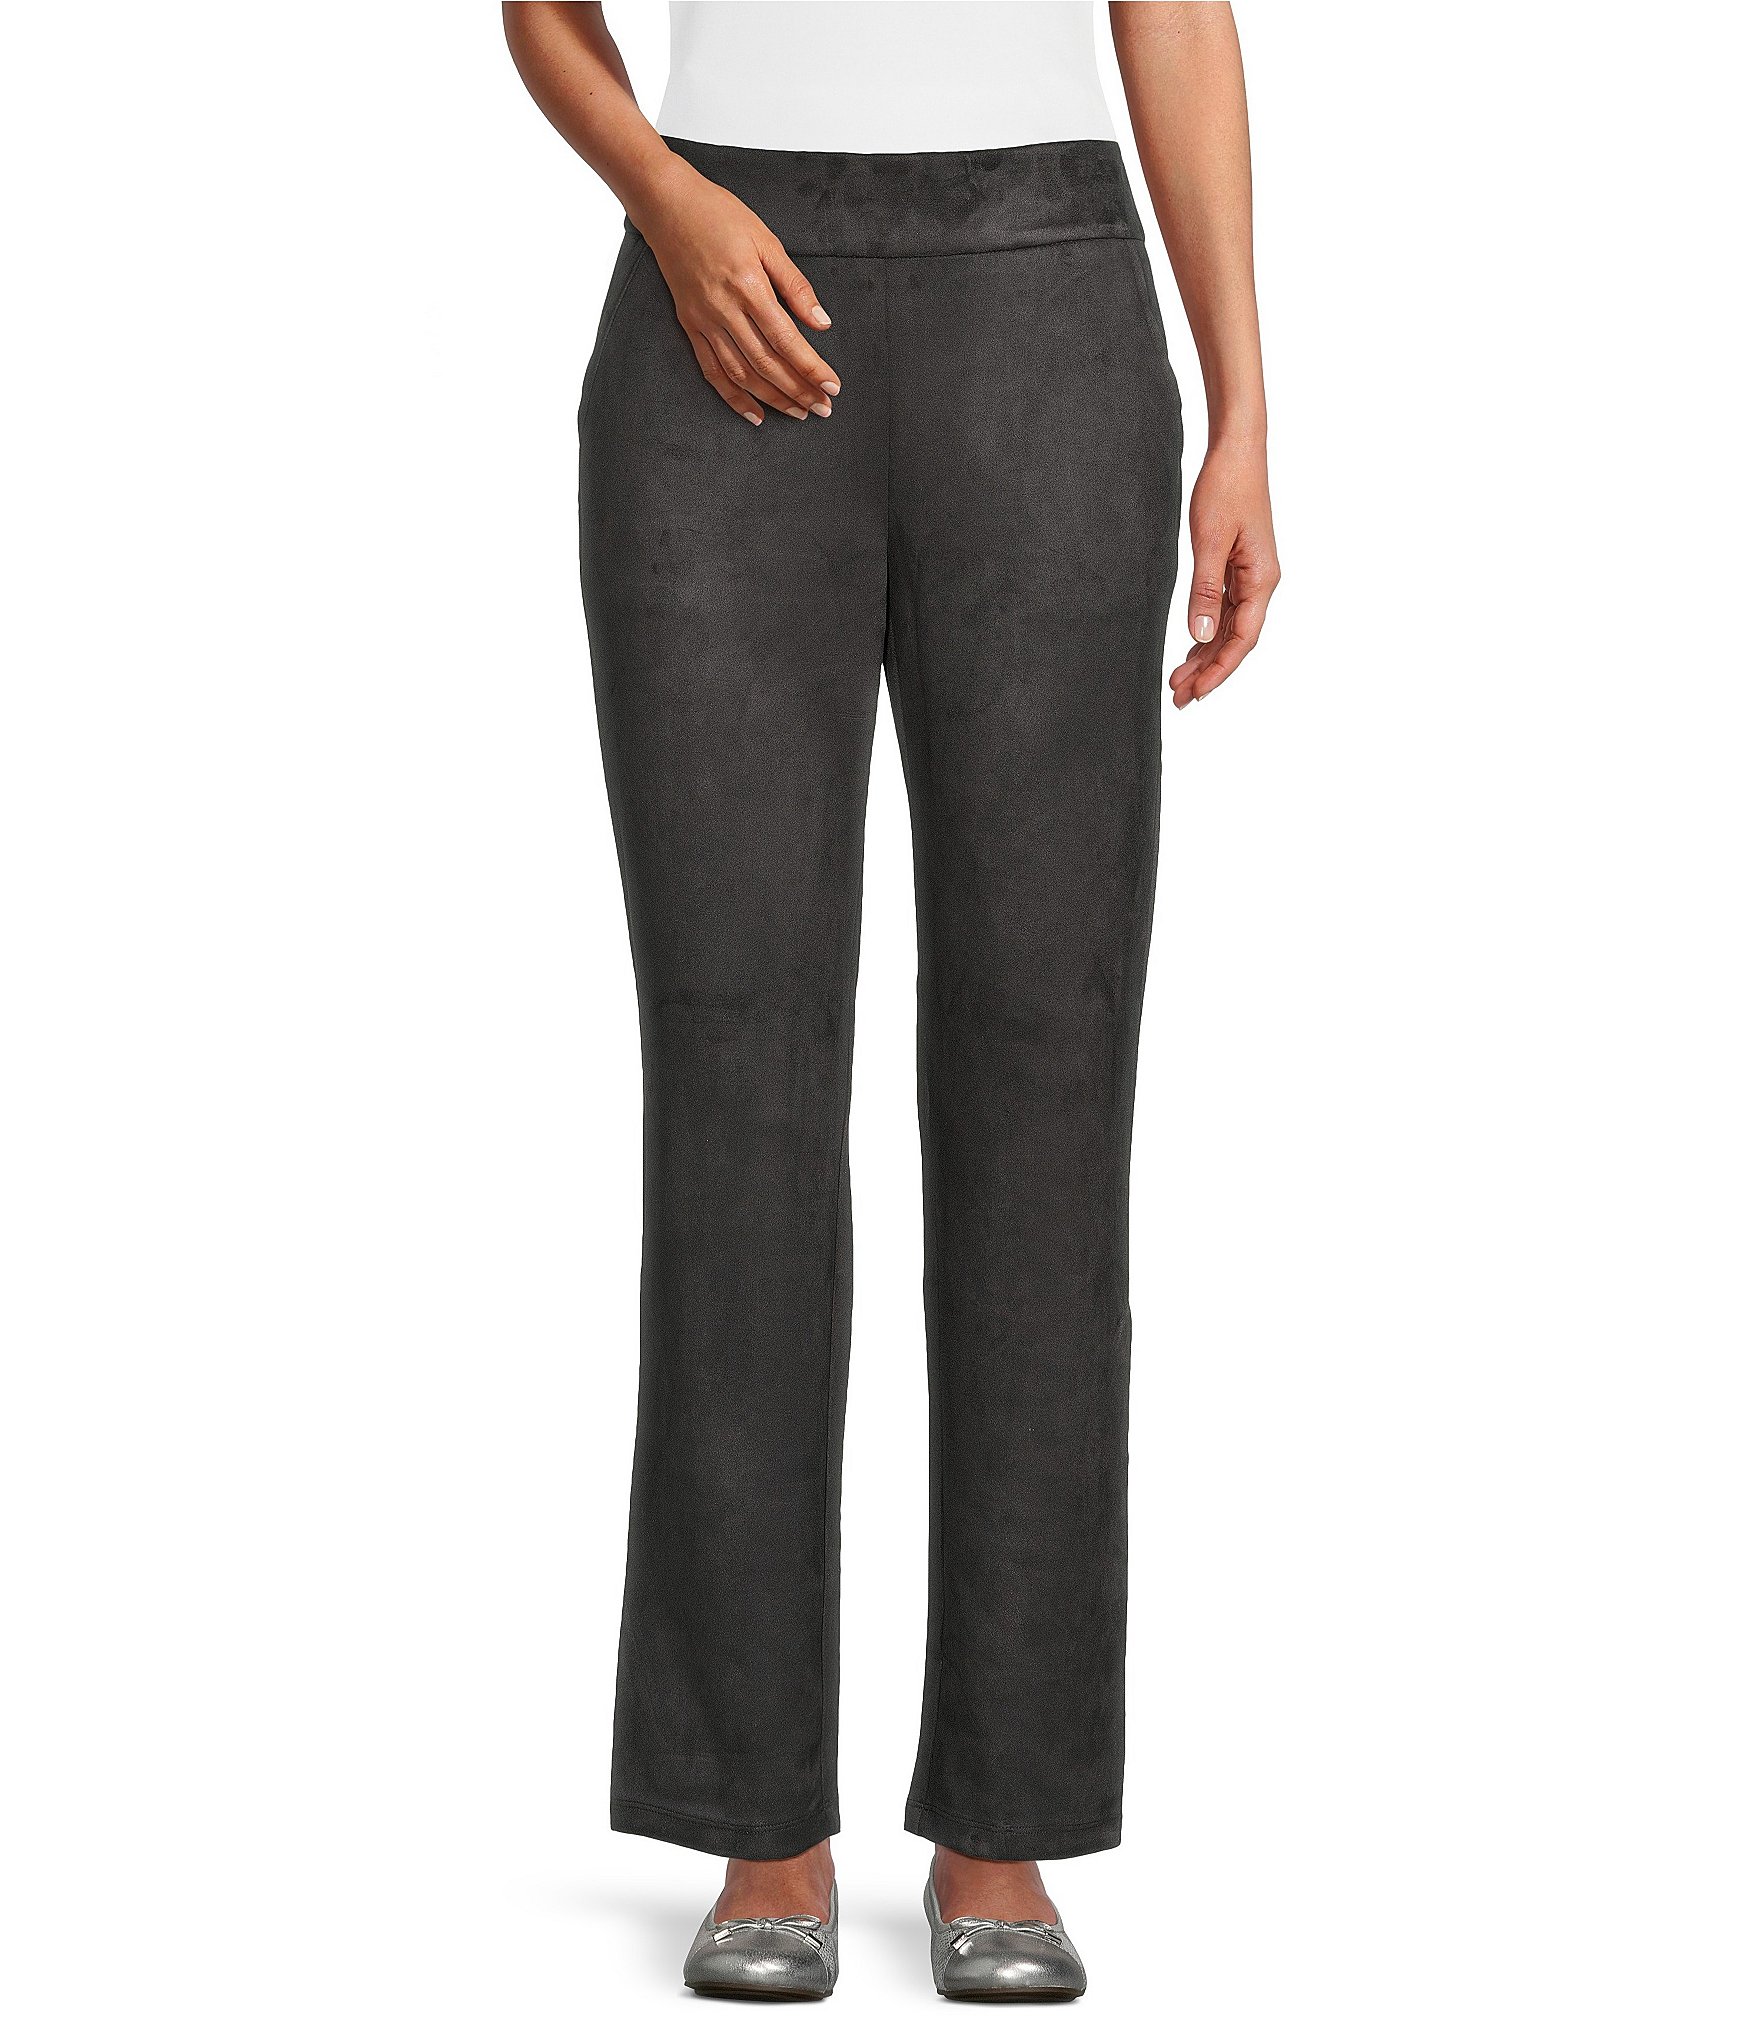 Allison Daley Petite Size Luxe Suede Straight Leg Pull-On Pants | Dillard's